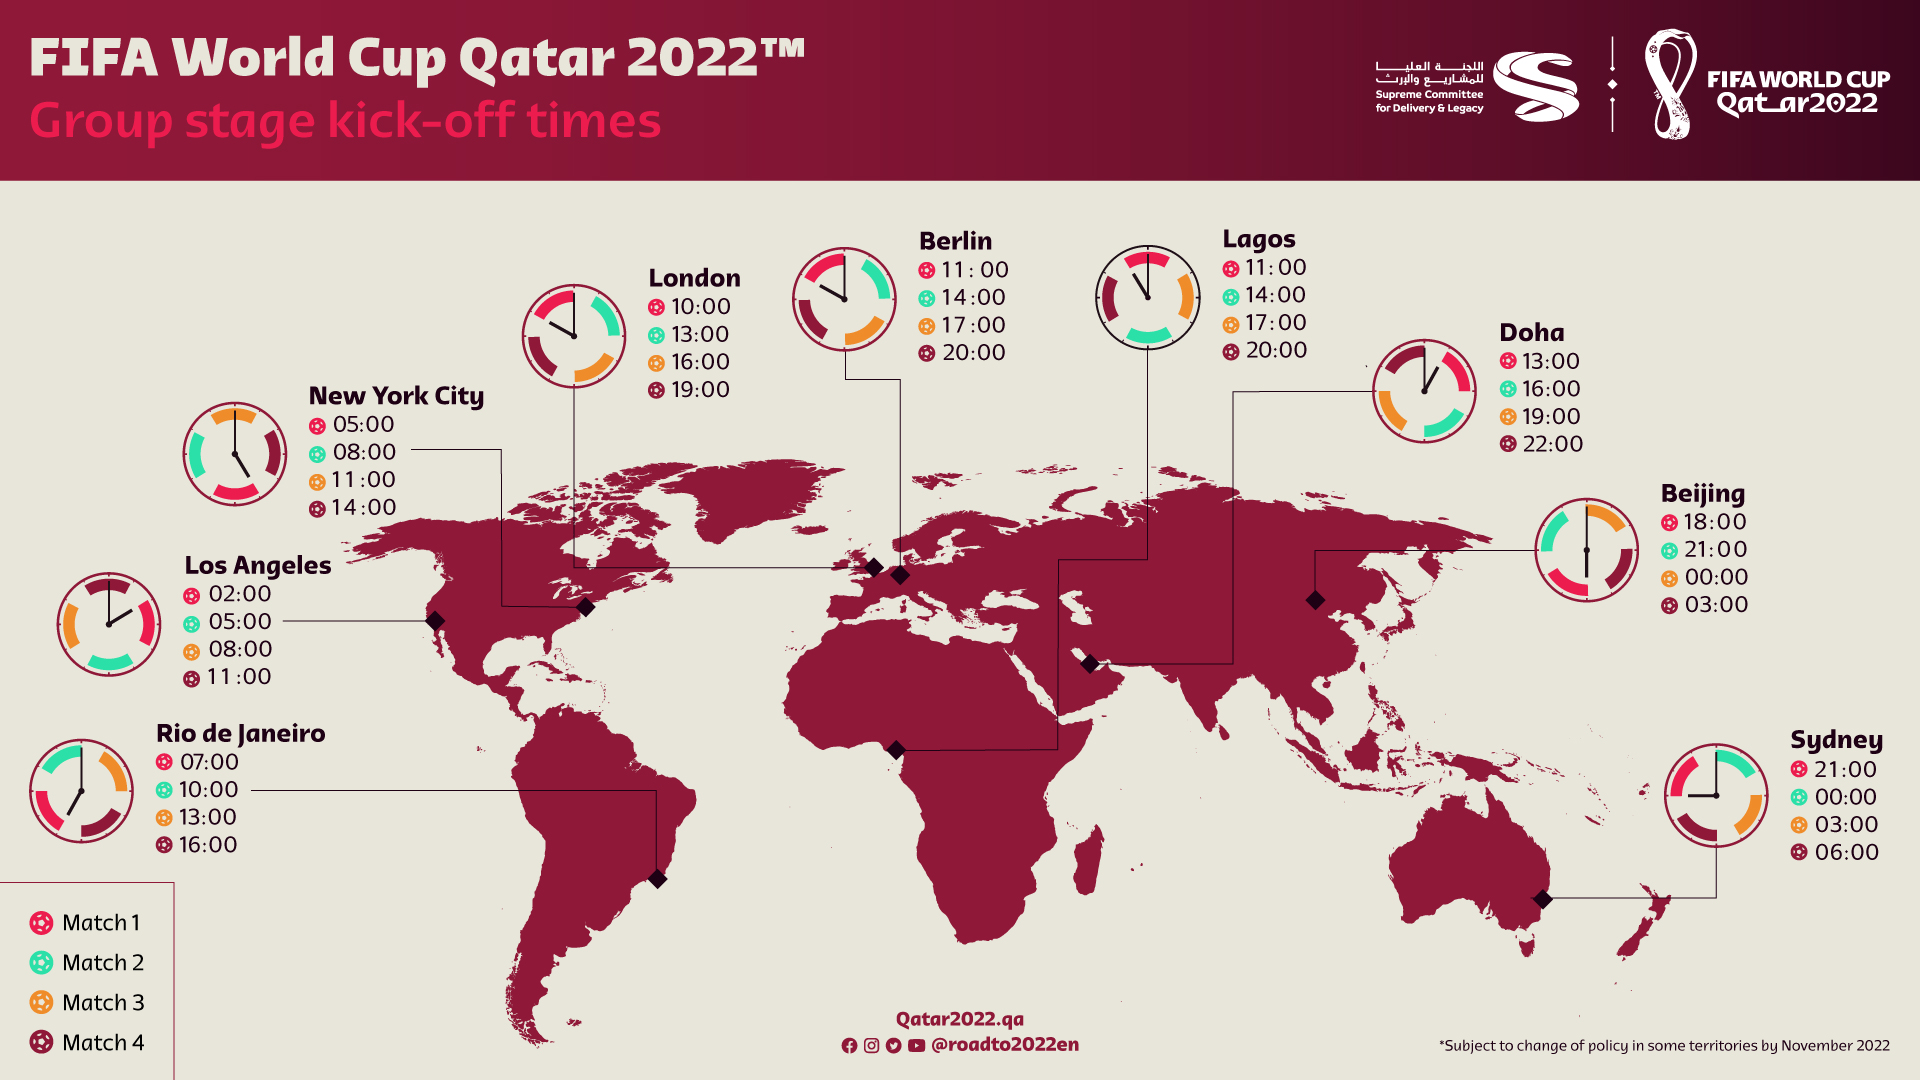 FIFA World Cup™ match schedule confirmed: hosts Qatar to kick off 2022